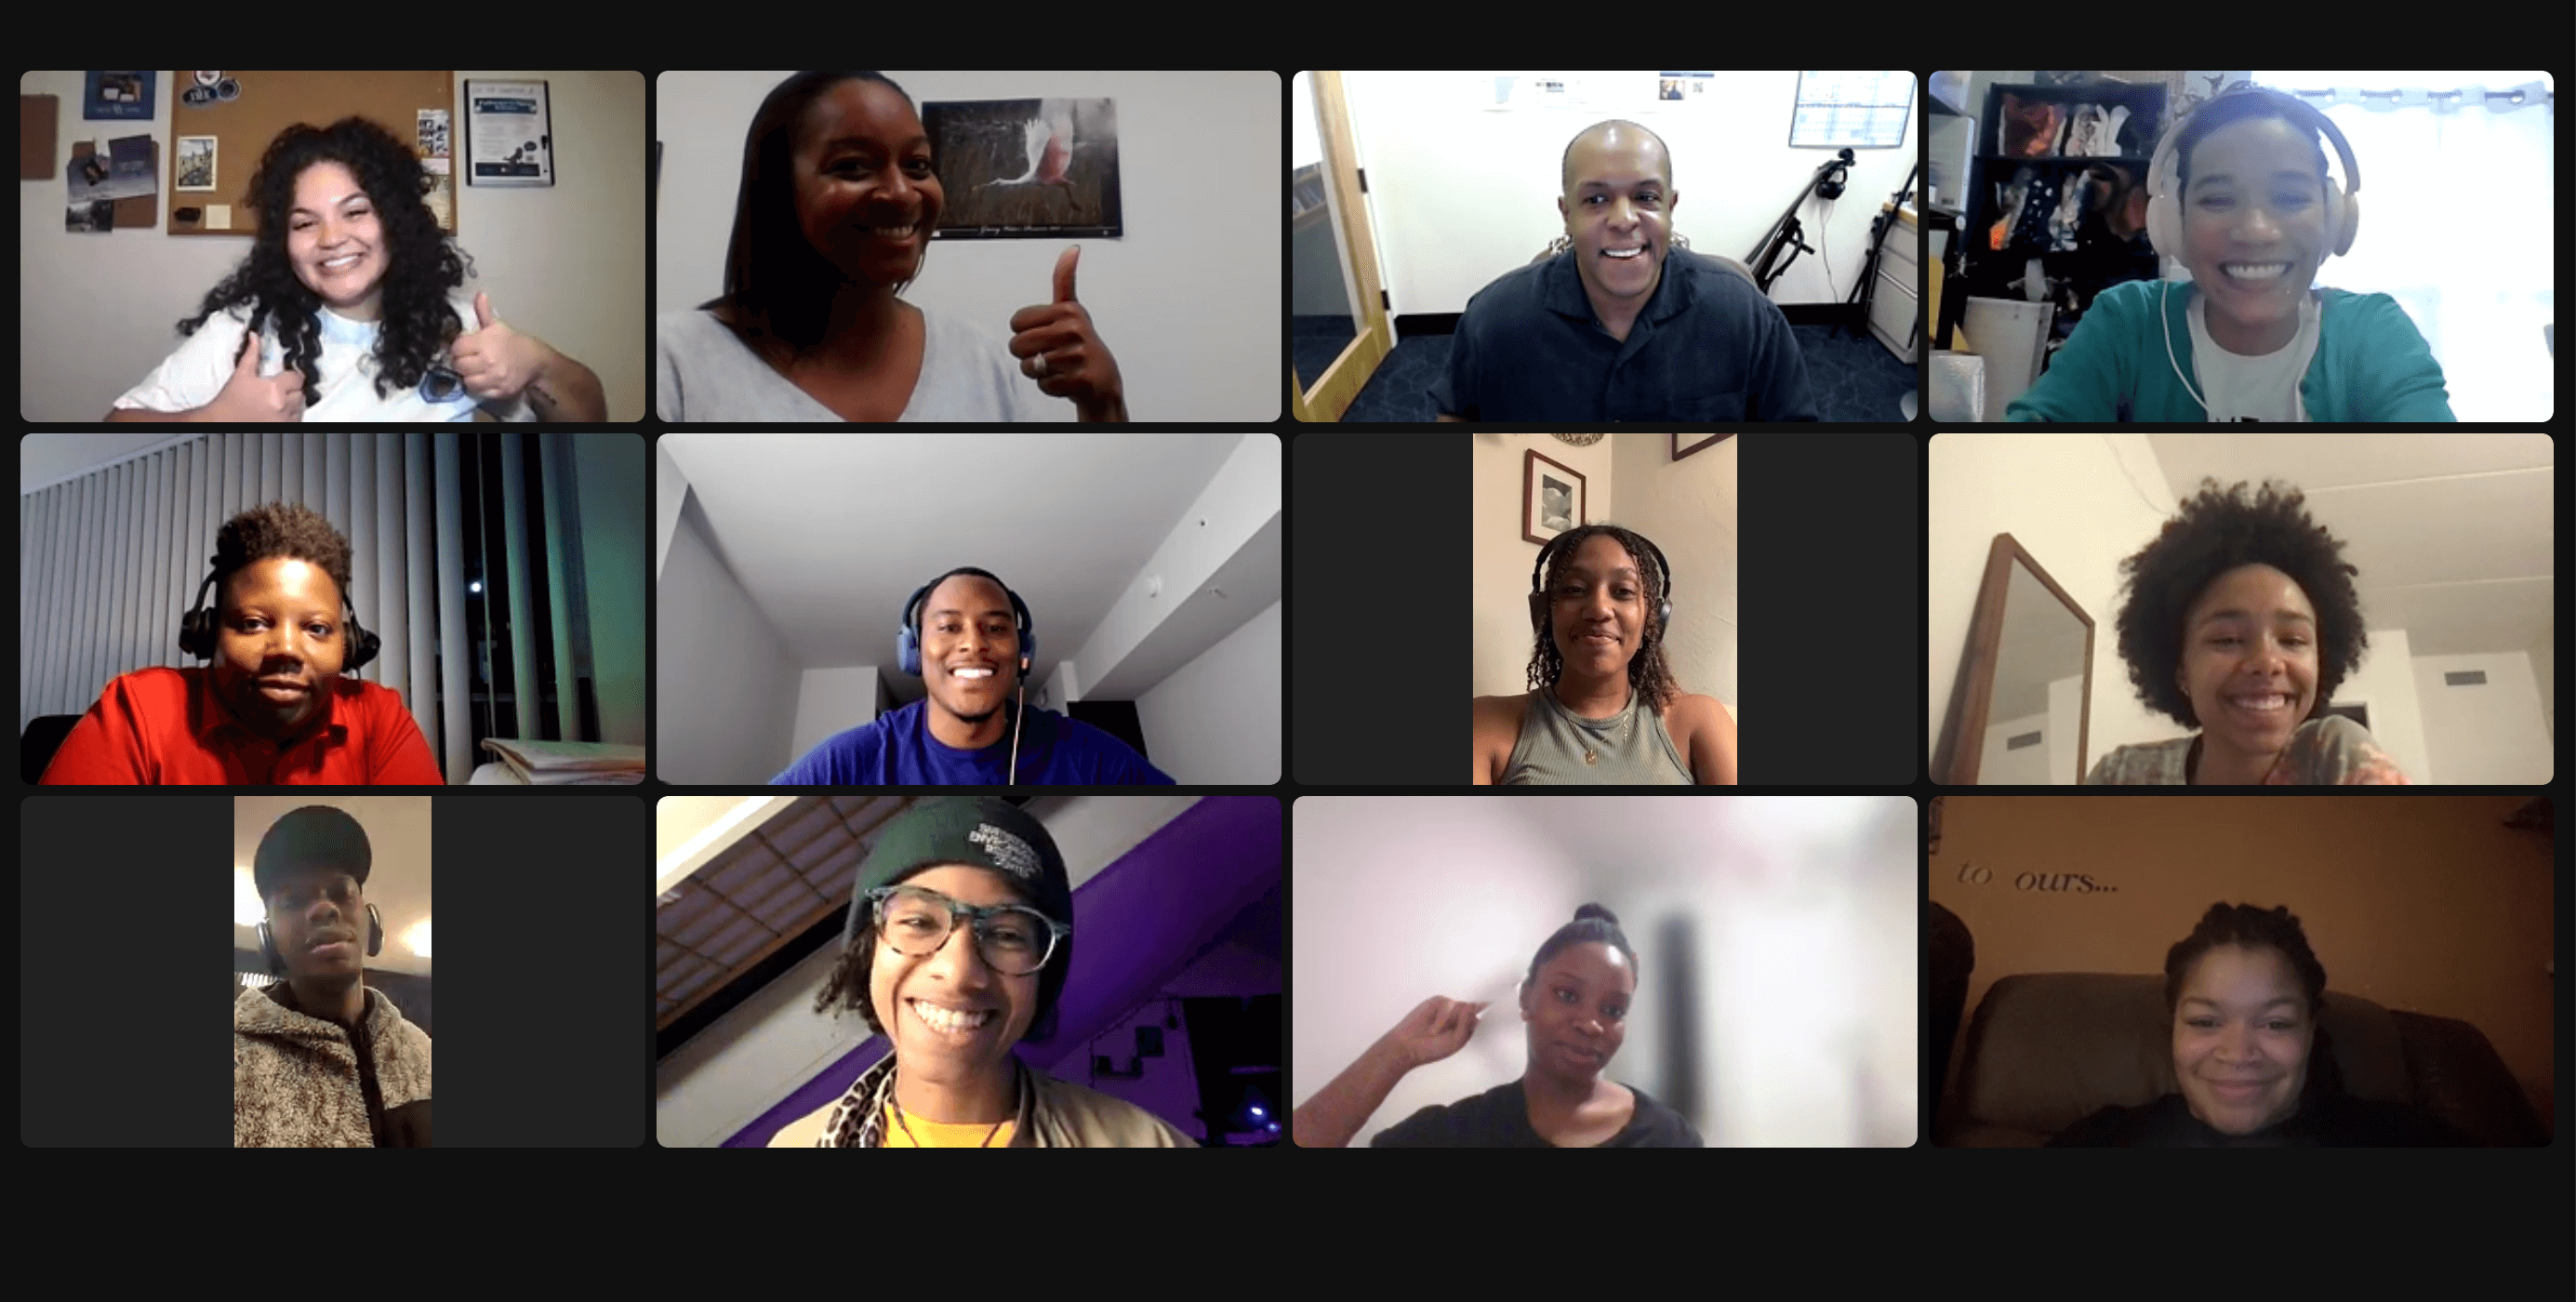 Zoom screenshot of smiling faces of Black people in a 3 by 4 grid. Some are giving thumbs up.